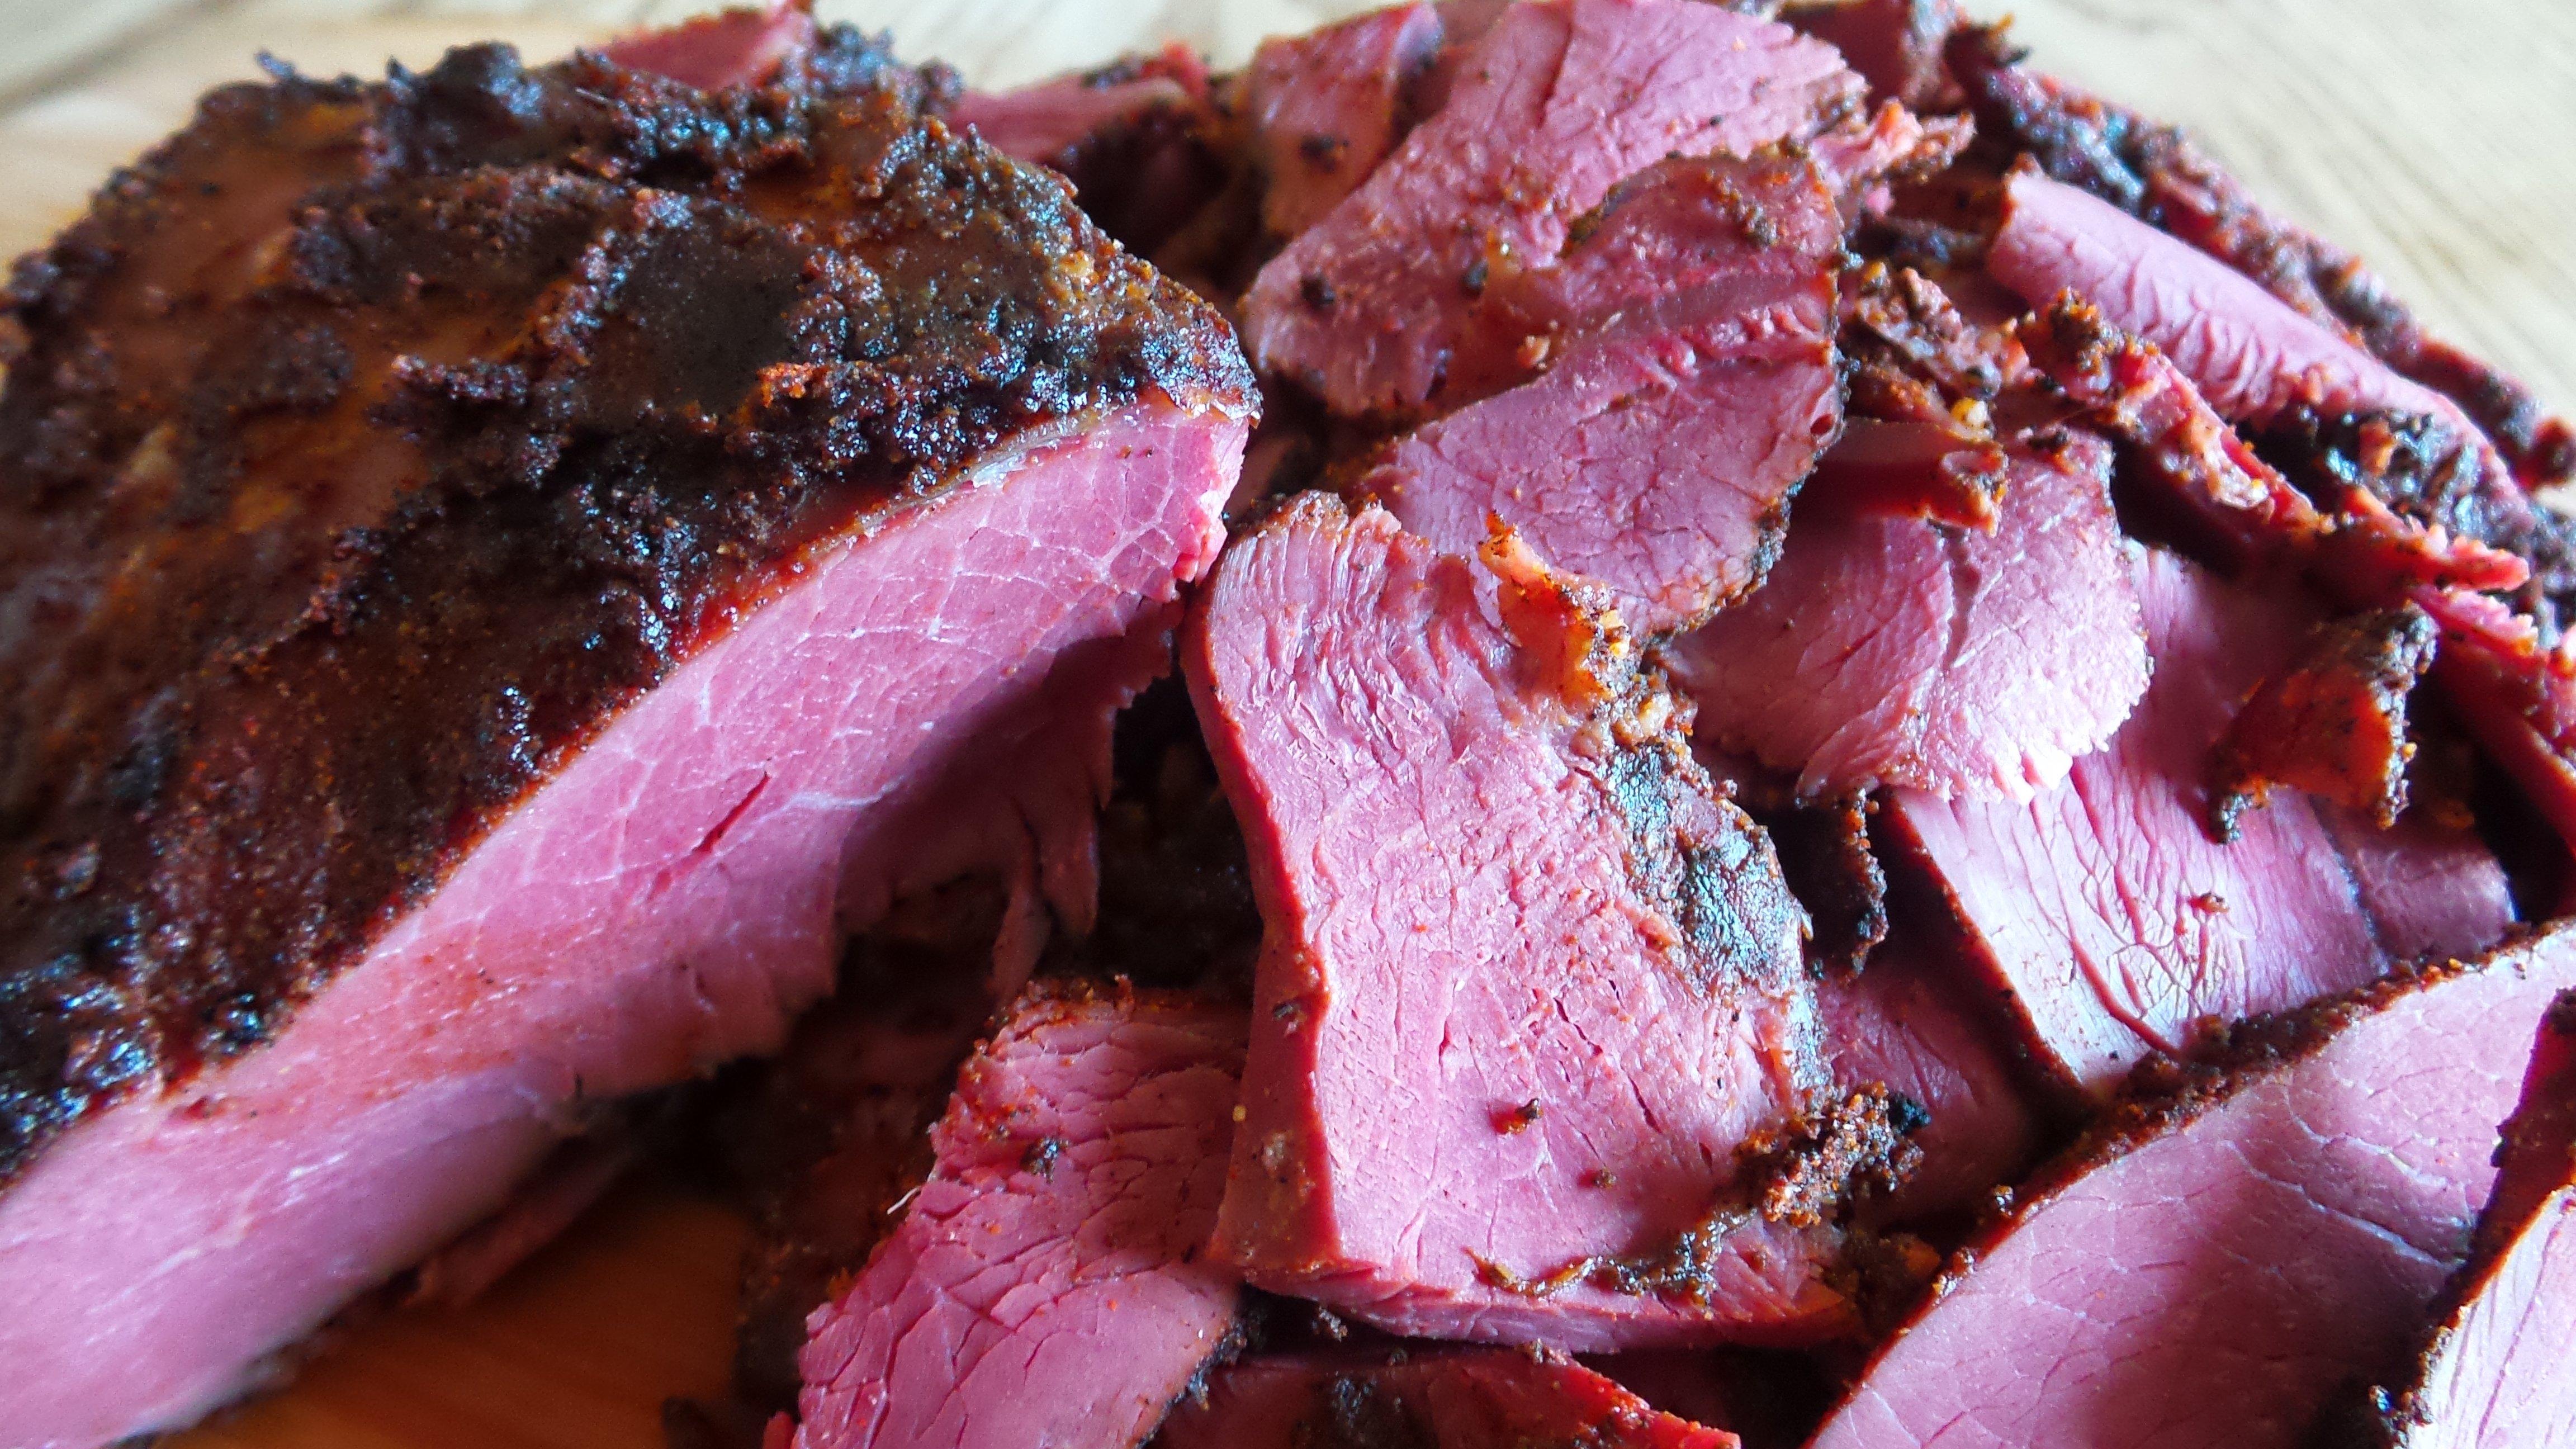 Because the pastrami is cured, the meat will remain pink even after being cooked through.